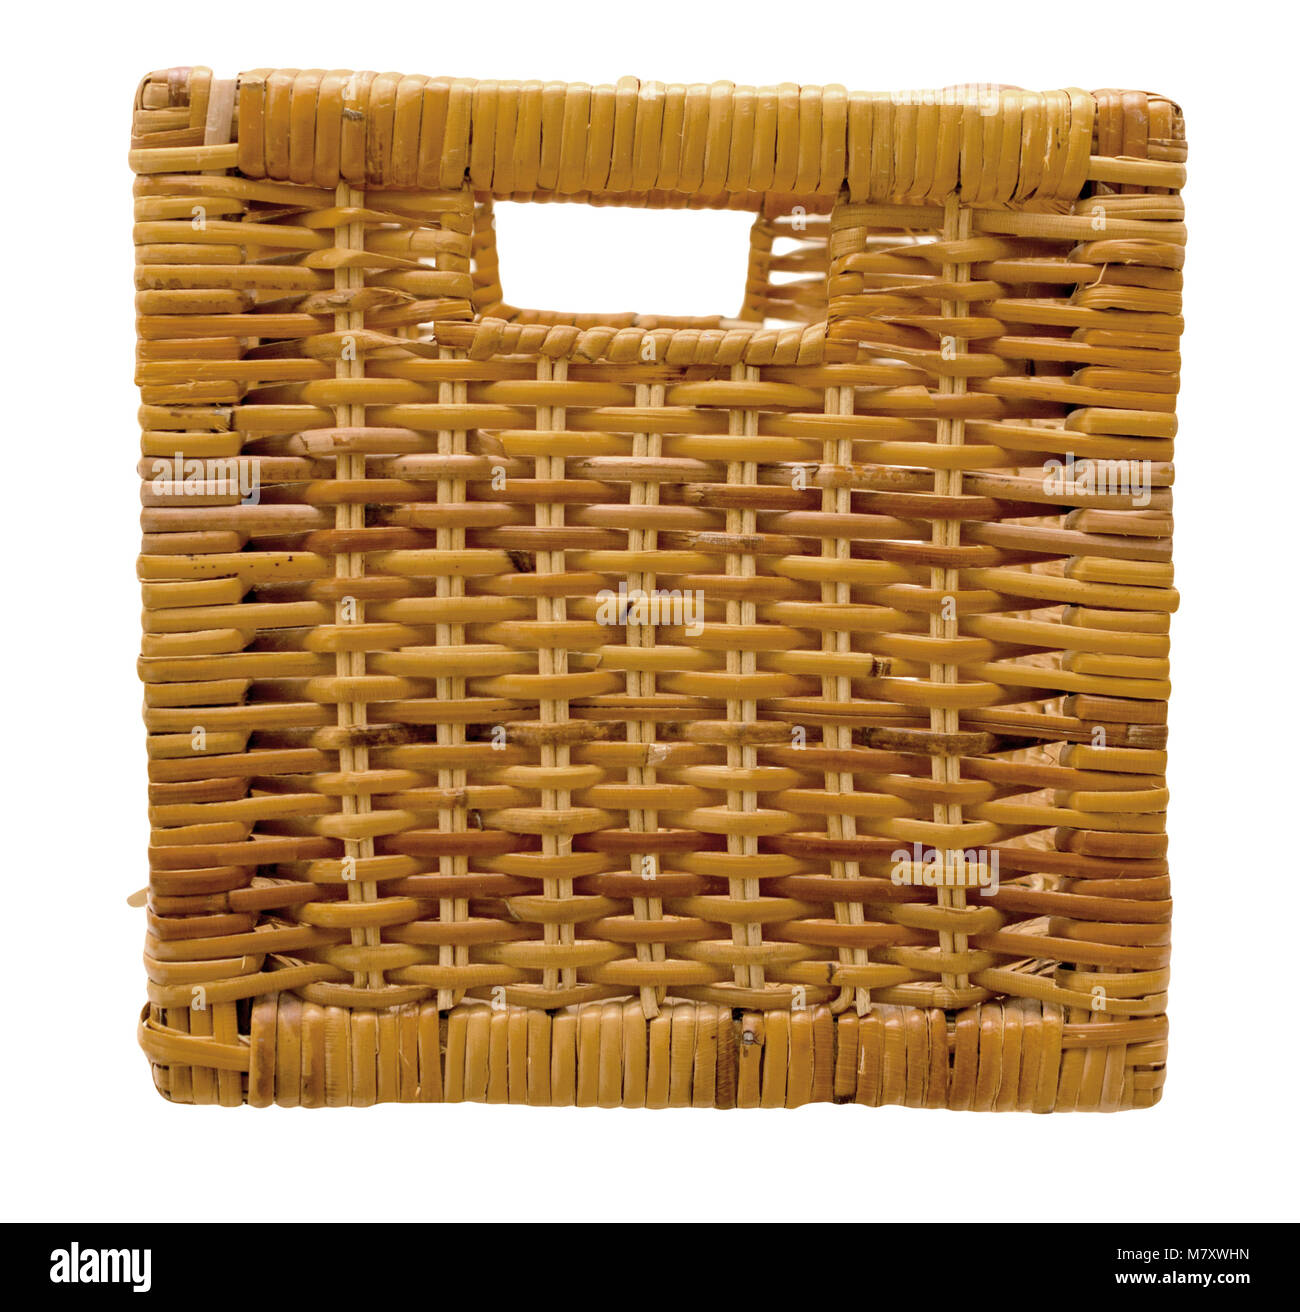 front view on rattan basket Stock Photo